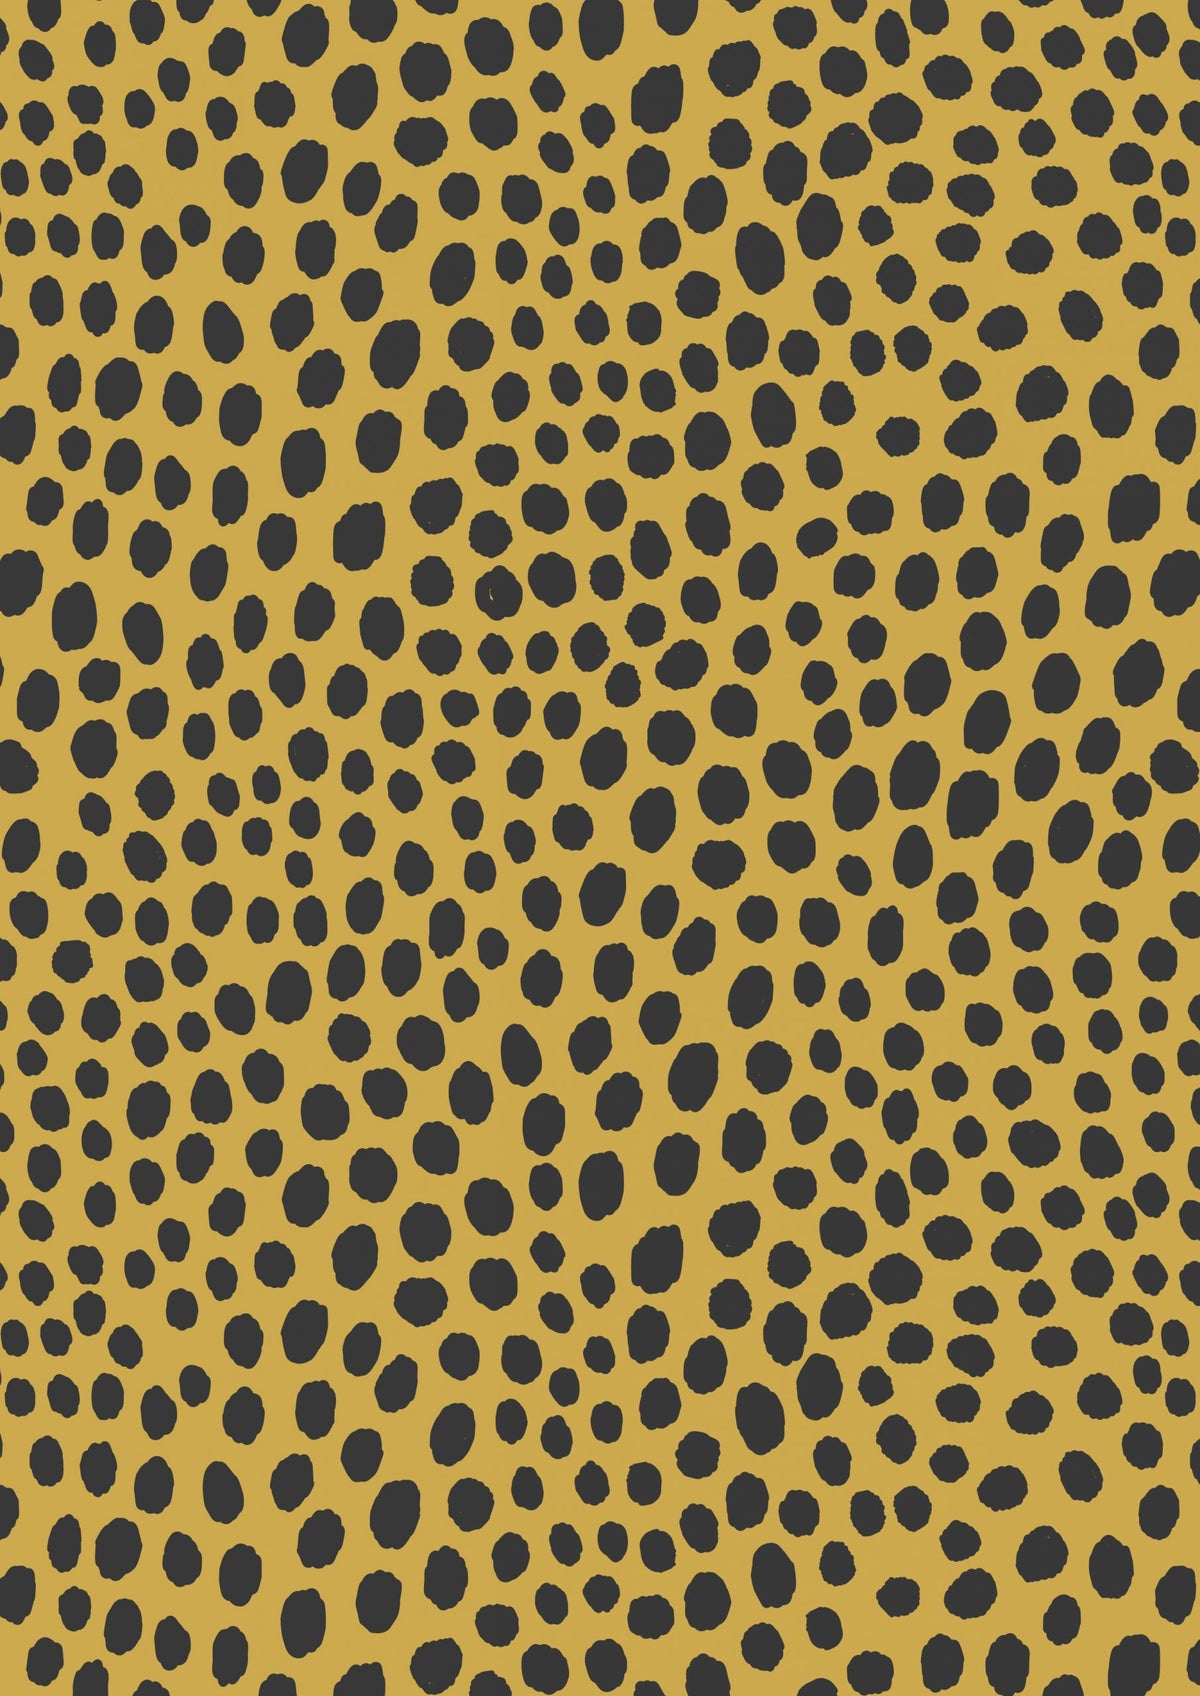 Small Things Wild Animals Quilt Fabric - Cheetah Print in Gold and Black - A698